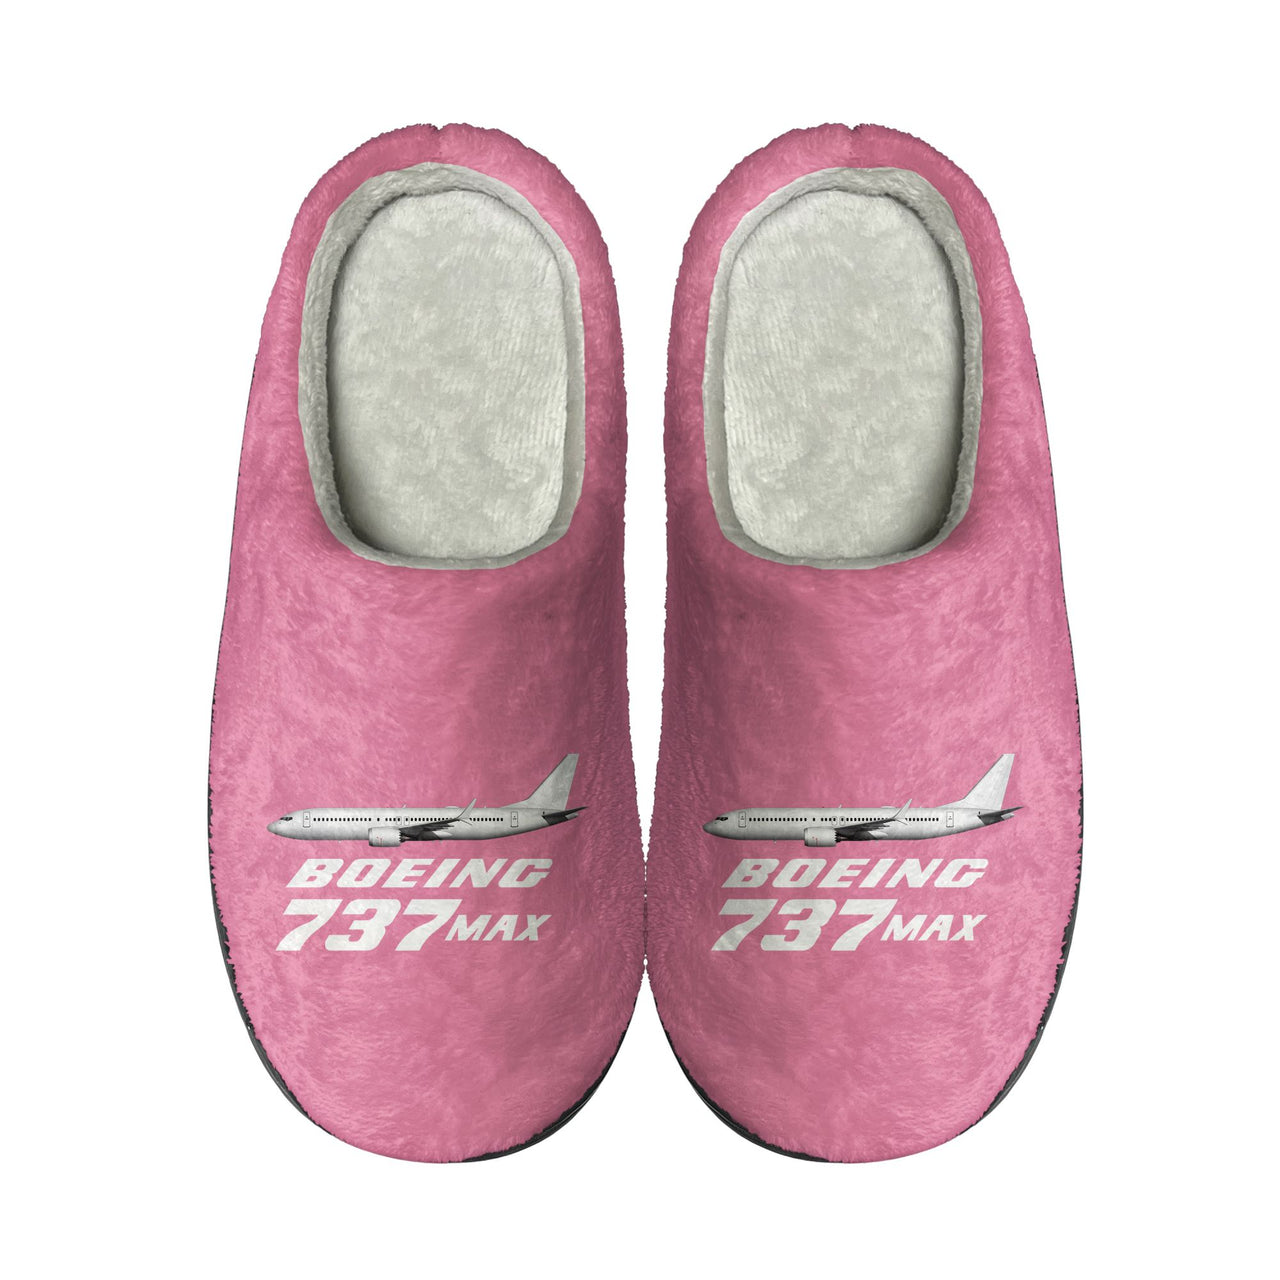 The Boeing 737Max Designed Cotton Slippers